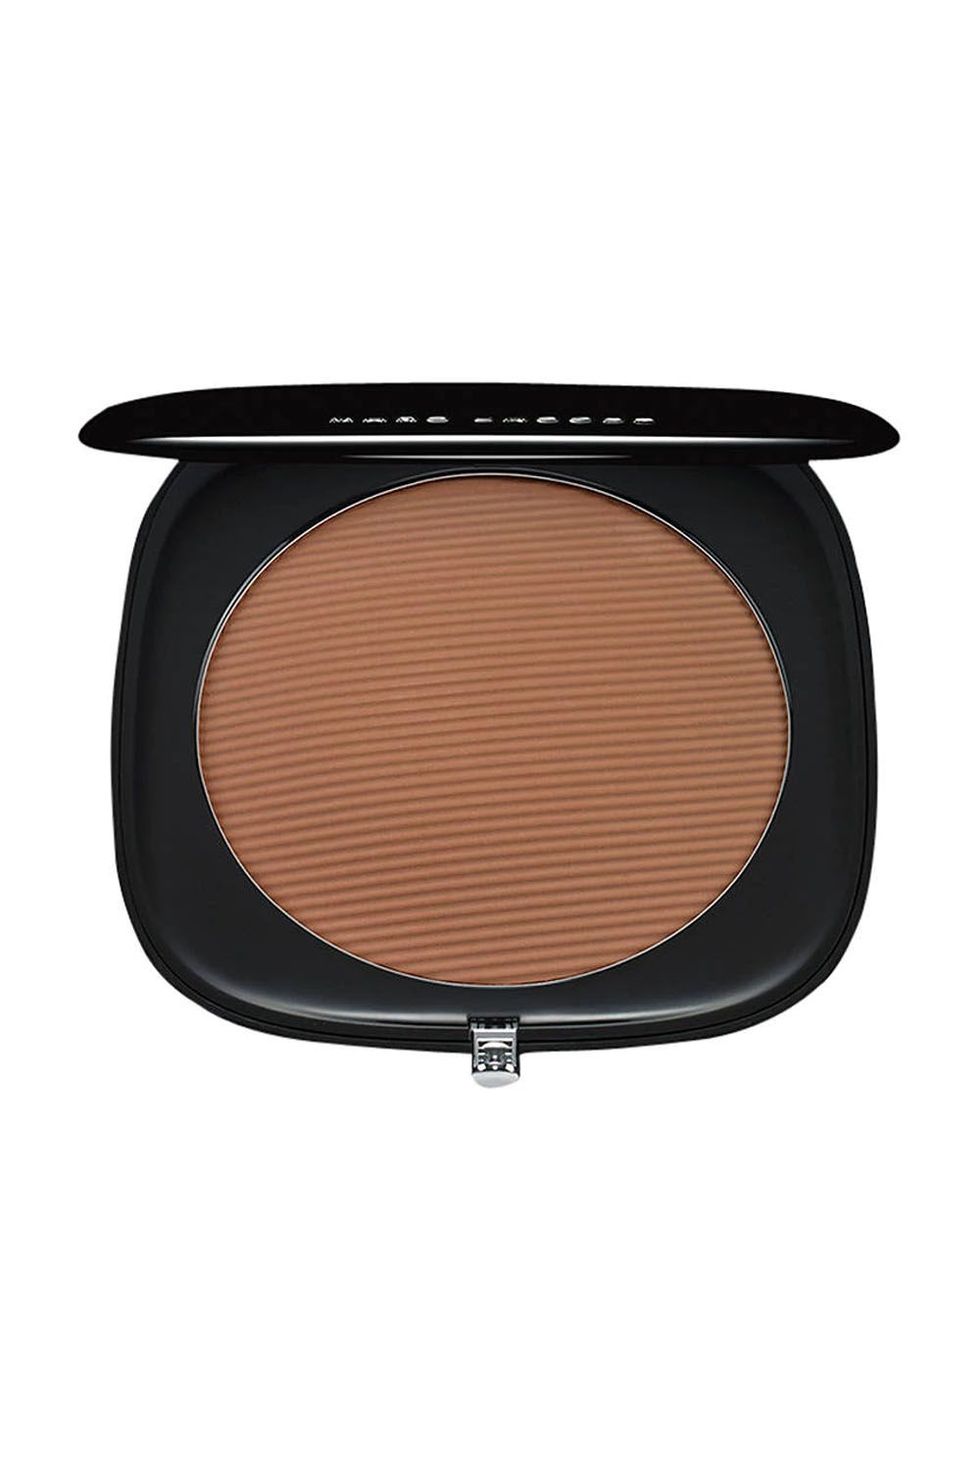 Marc Jacobs Beauty Omega Bronzer Perfect Tan